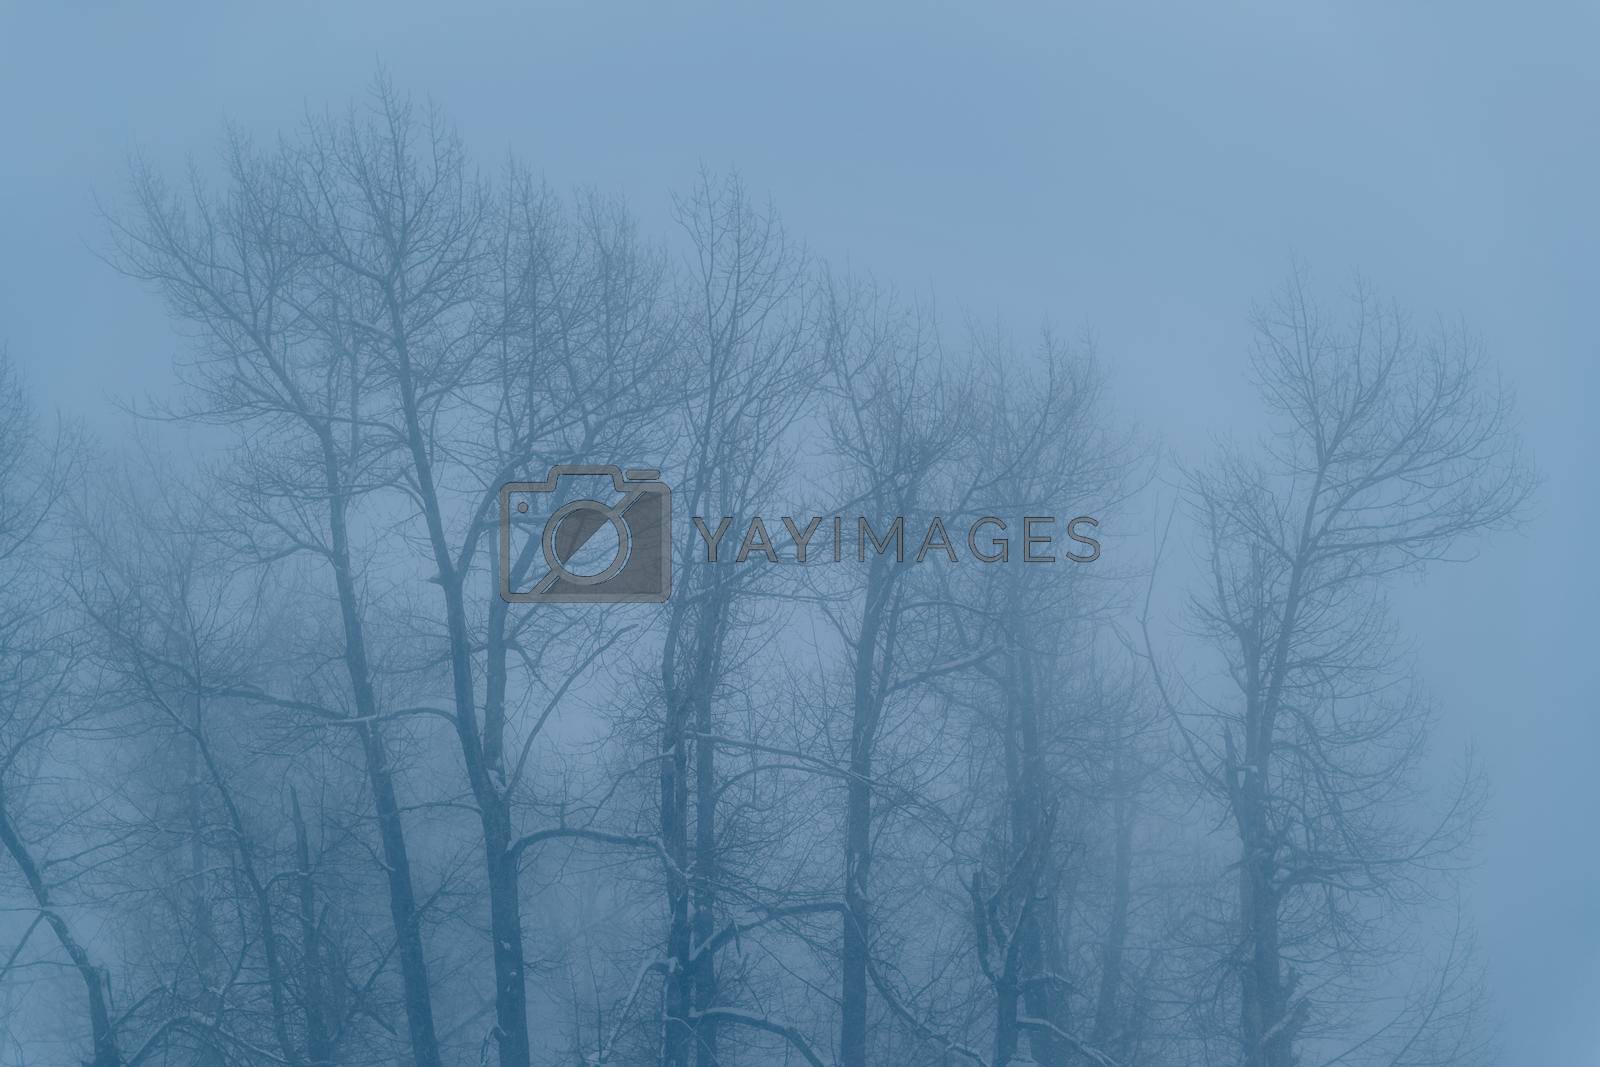 Royalty free image of Leafless Trees in the Fog by Anna_Omelchenko